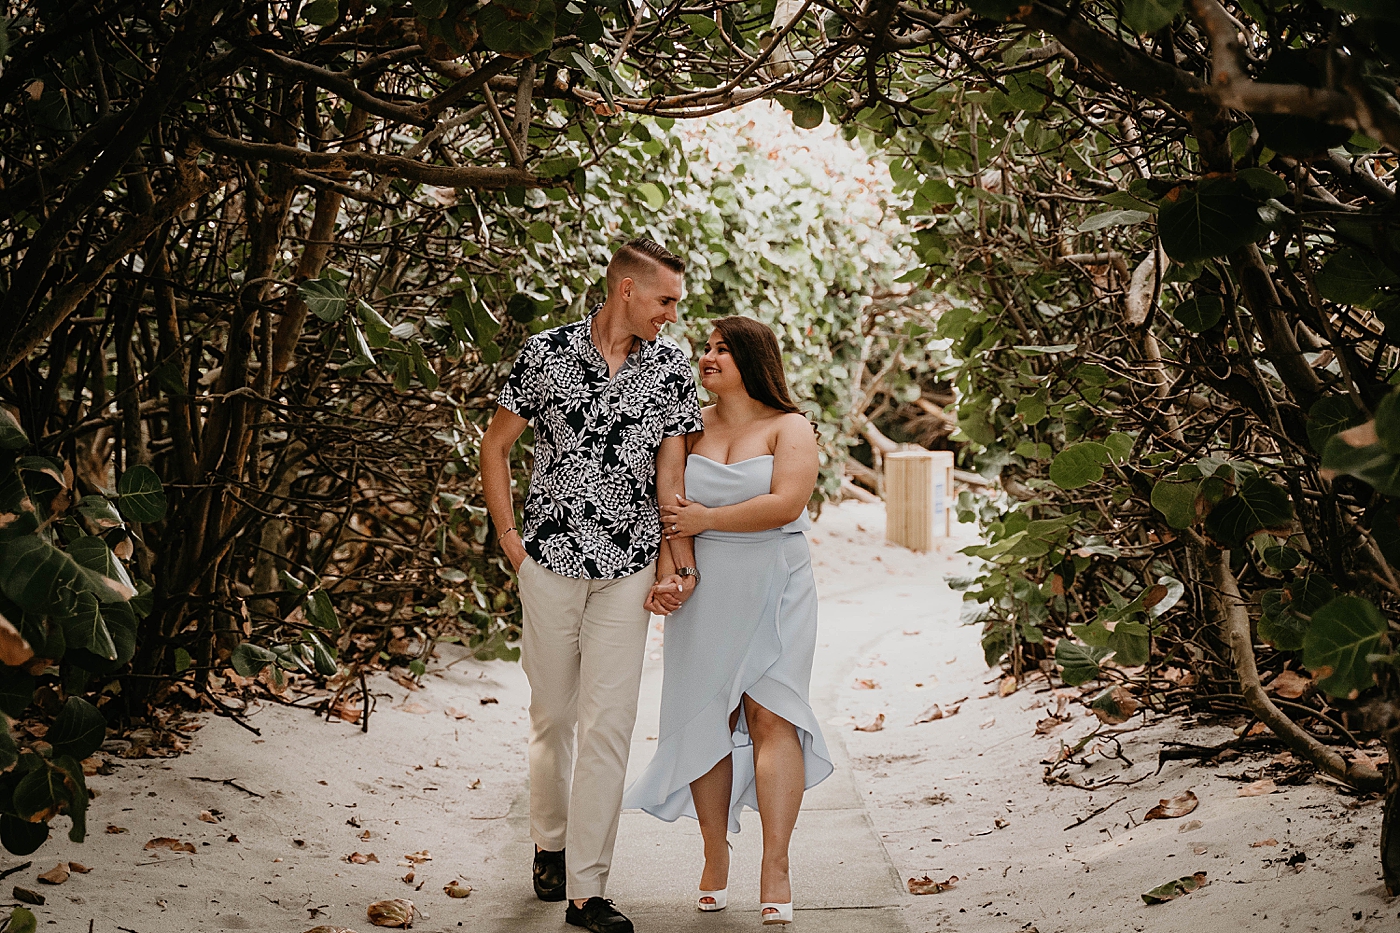 Couple walking down beach path with greenery South Florida Beach Photography captured by Krystal Capone Photography